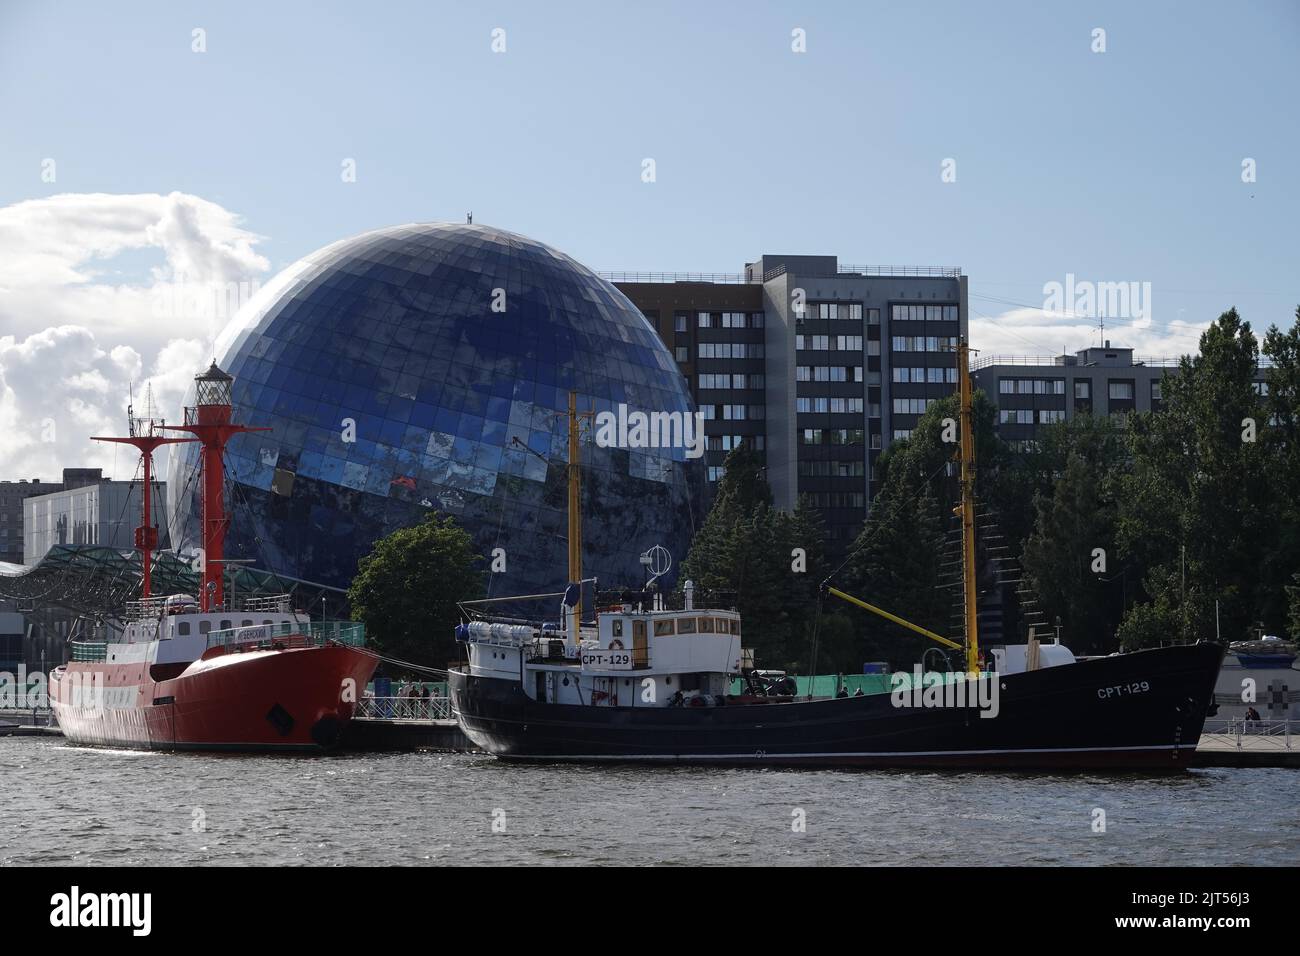 Kaliningrad, Russia. 15th July, 2022. Ships anchor in Russia's Baltic exclave of Kaliningrad, the city formerly known as Königsberg. (to "Baltic Sea exclave Kaliningrad continues to complain about sanctions pressure - and threatens") Credit: Ulf Mauder/dpa/Alamy Live News Stock Photo